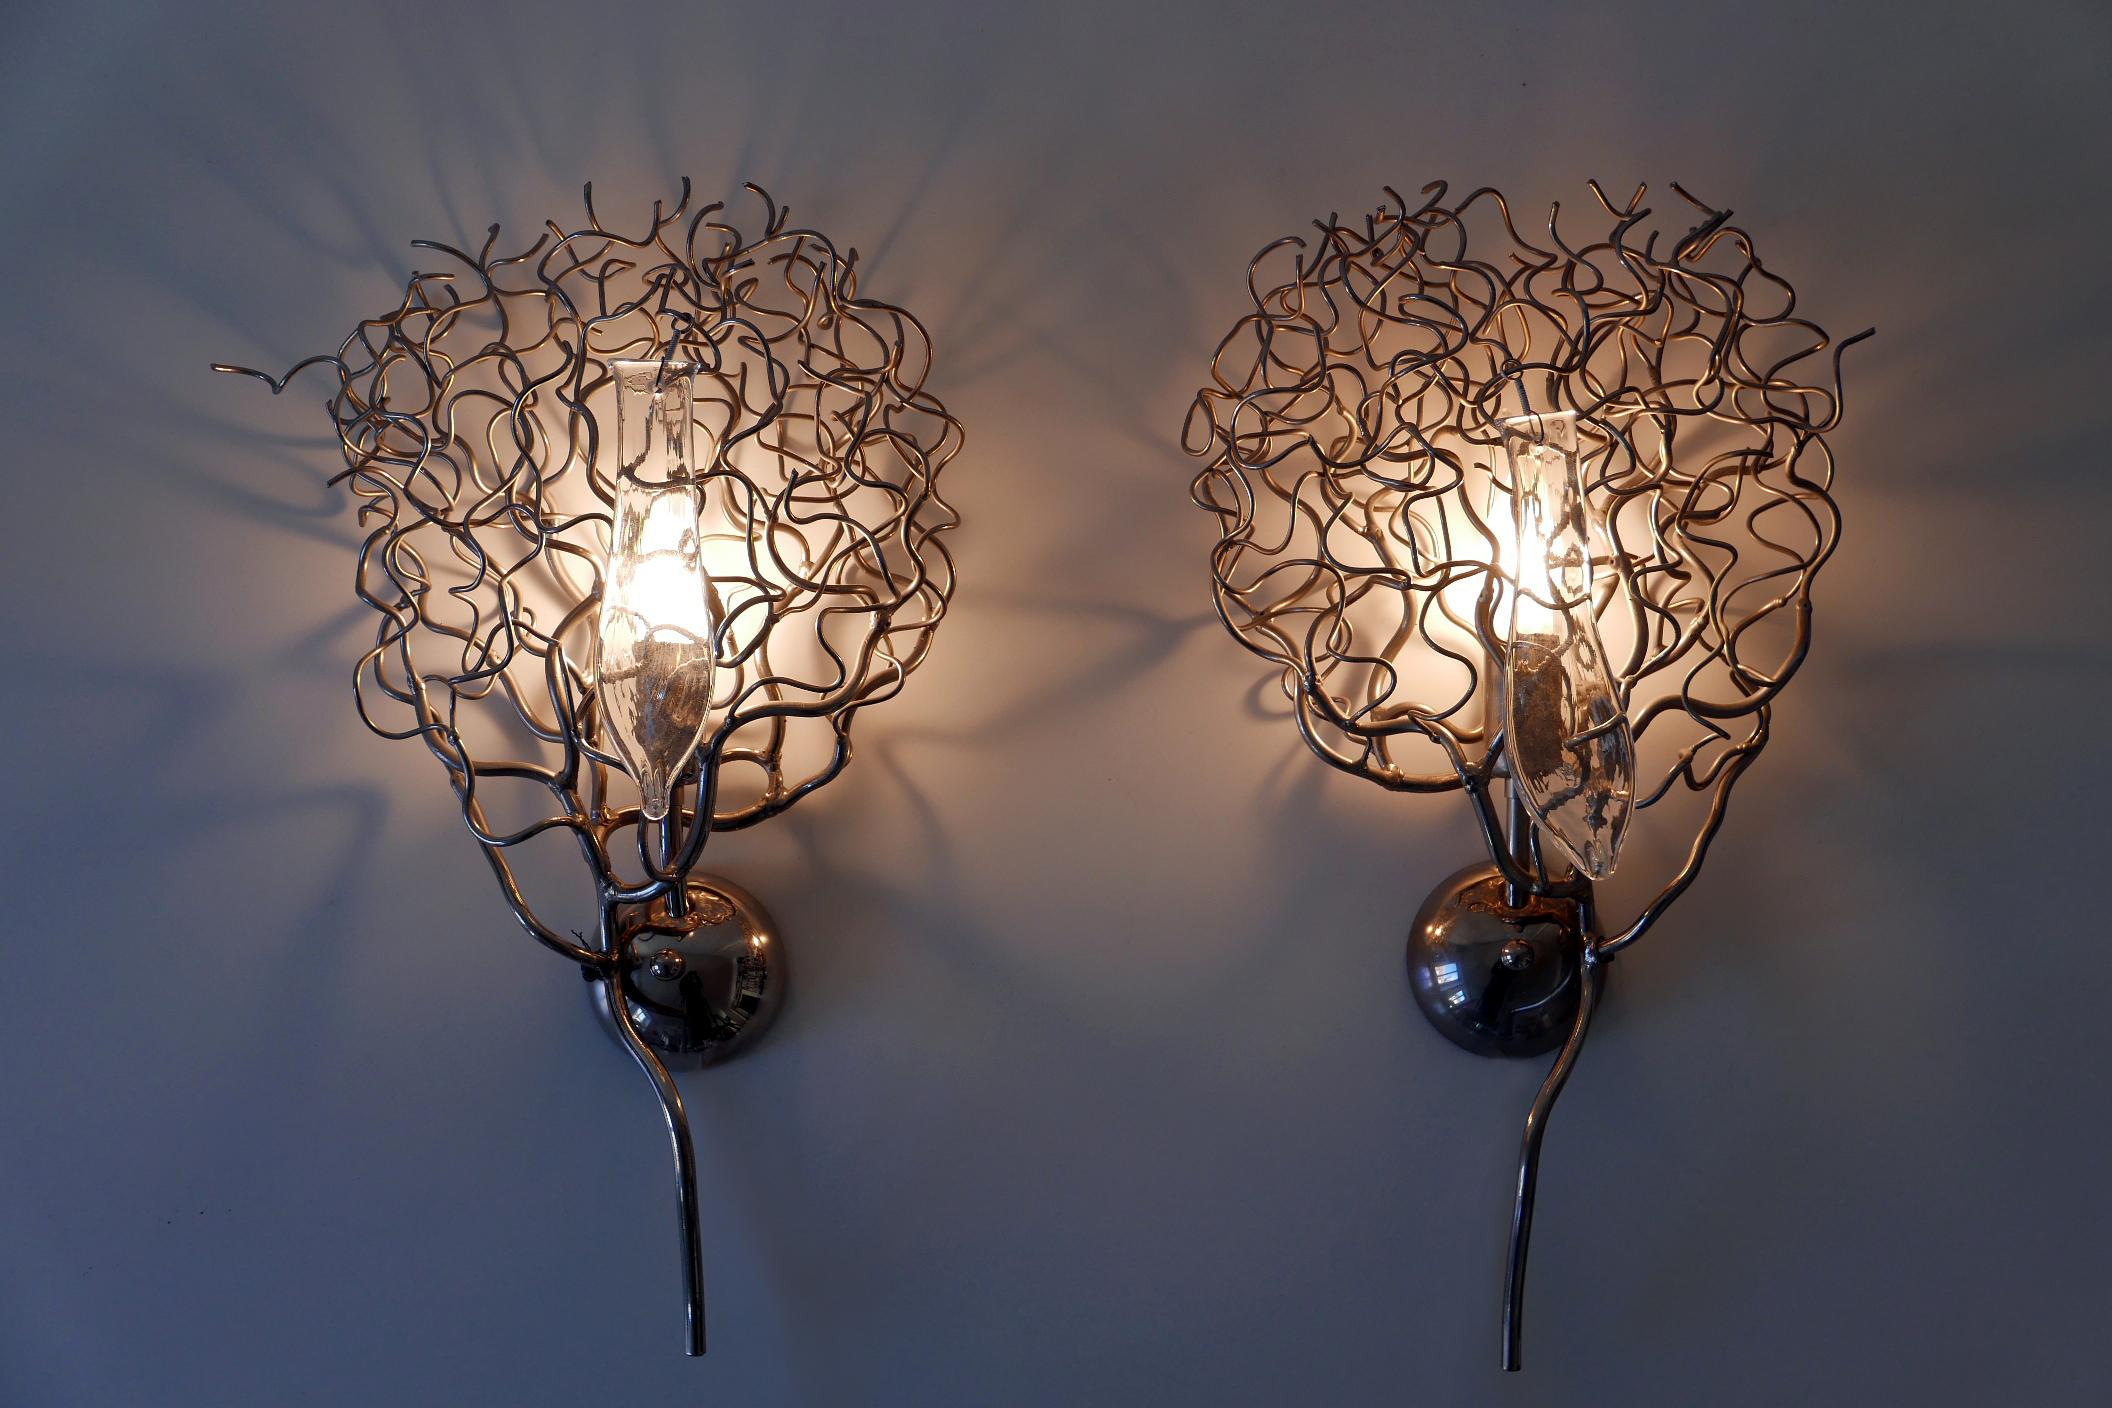 Set of two amazing wall lamps / sconces 'Hollywood' in shape of a three branch. Designed by Willam Brand, 2017 for Brand van Egmond, Netherlands.

Executed in nickel and glass, each lamp comes with 1 x E14 / E12 Edison screw fit bulb holder, is